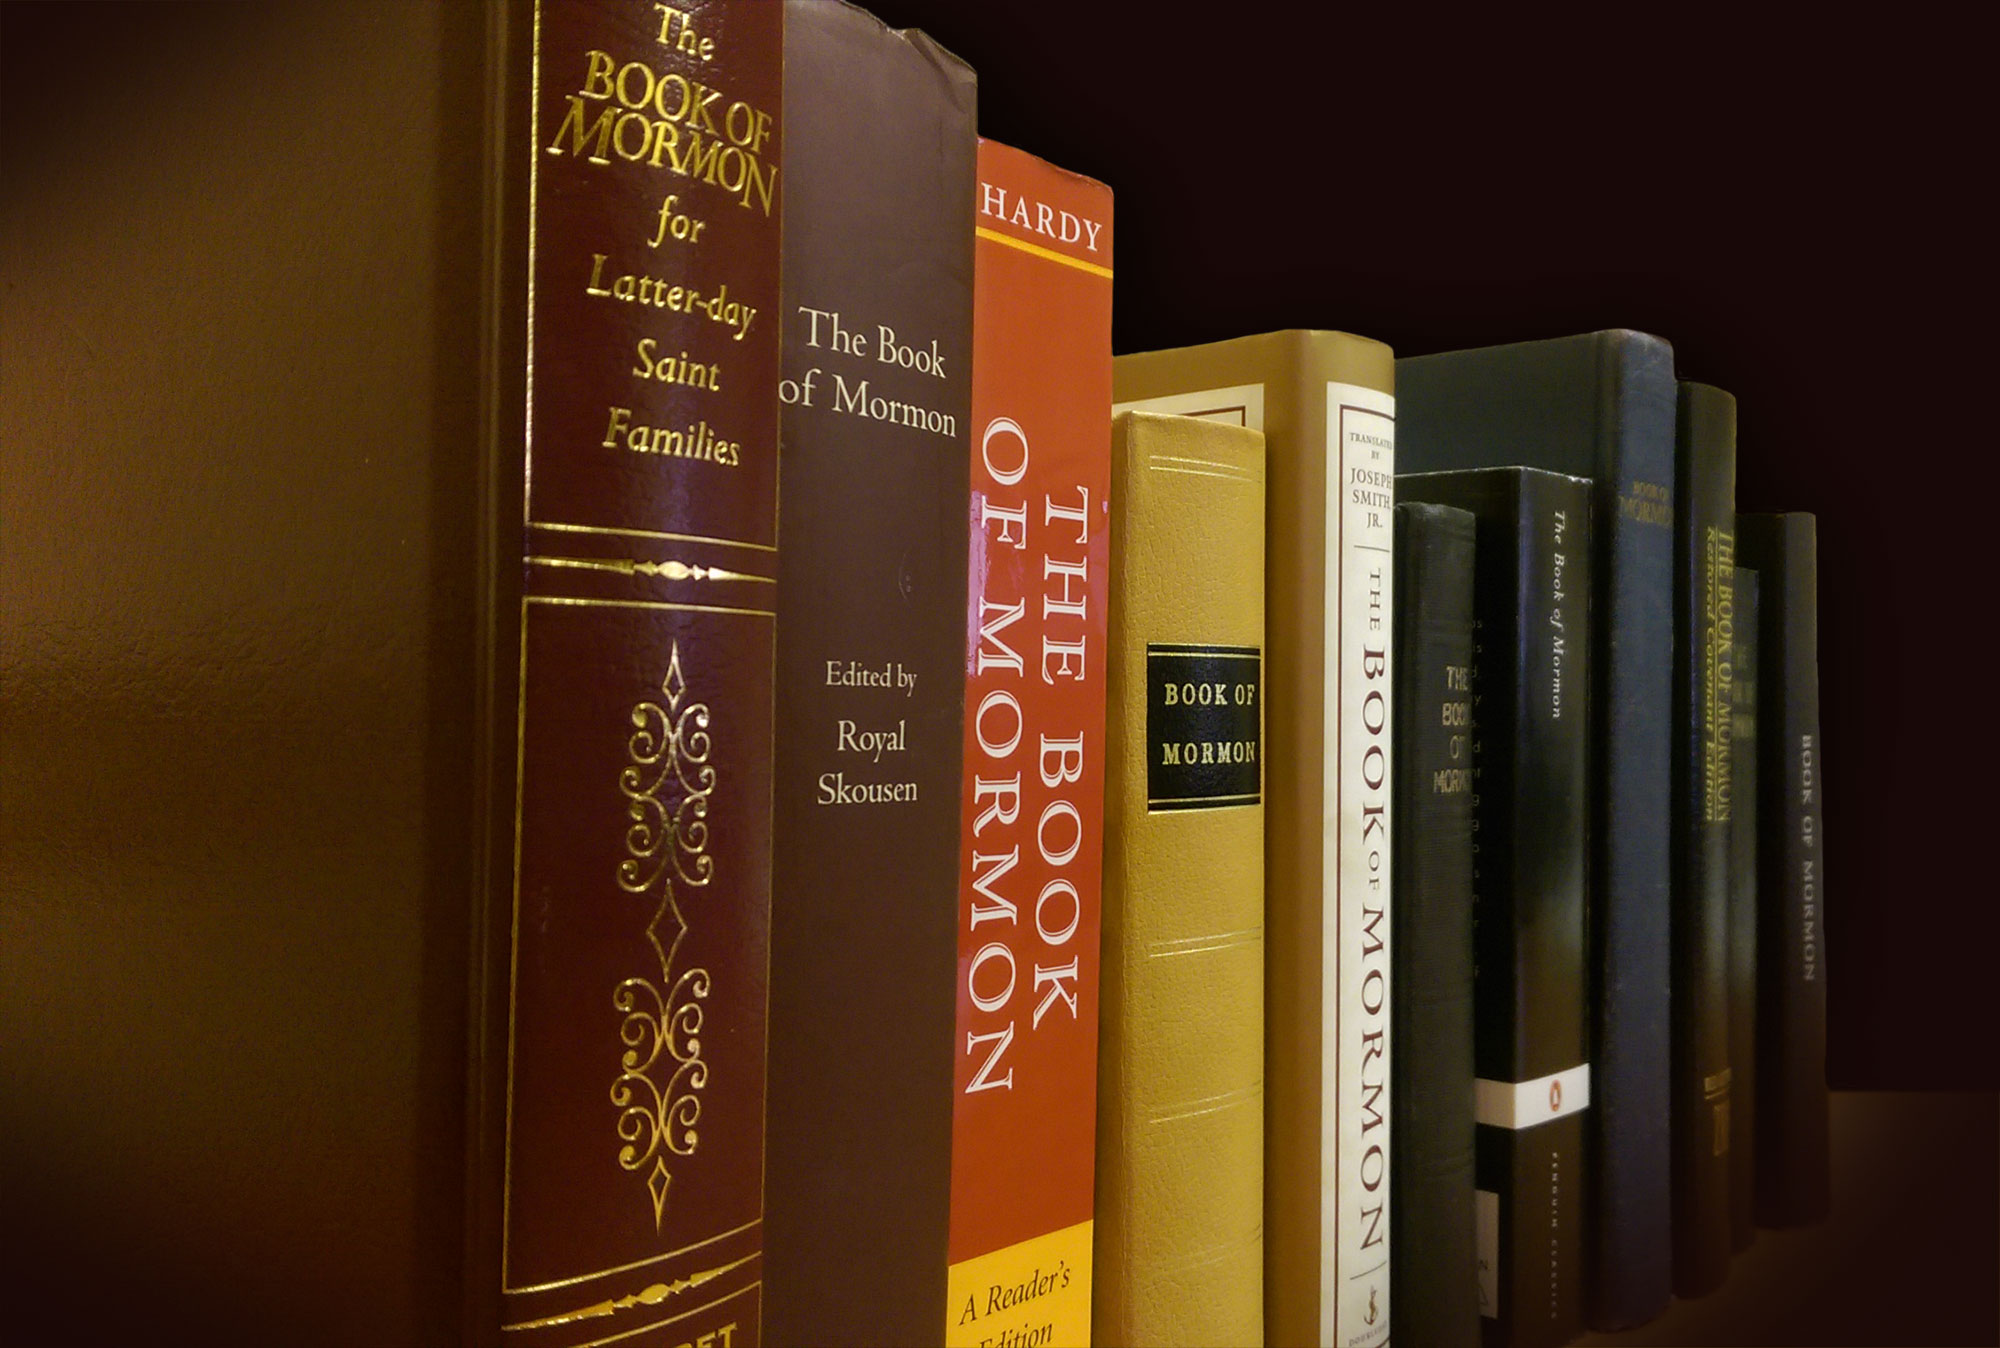 A row of 11 copies of The Book of Mormon are picture from one end